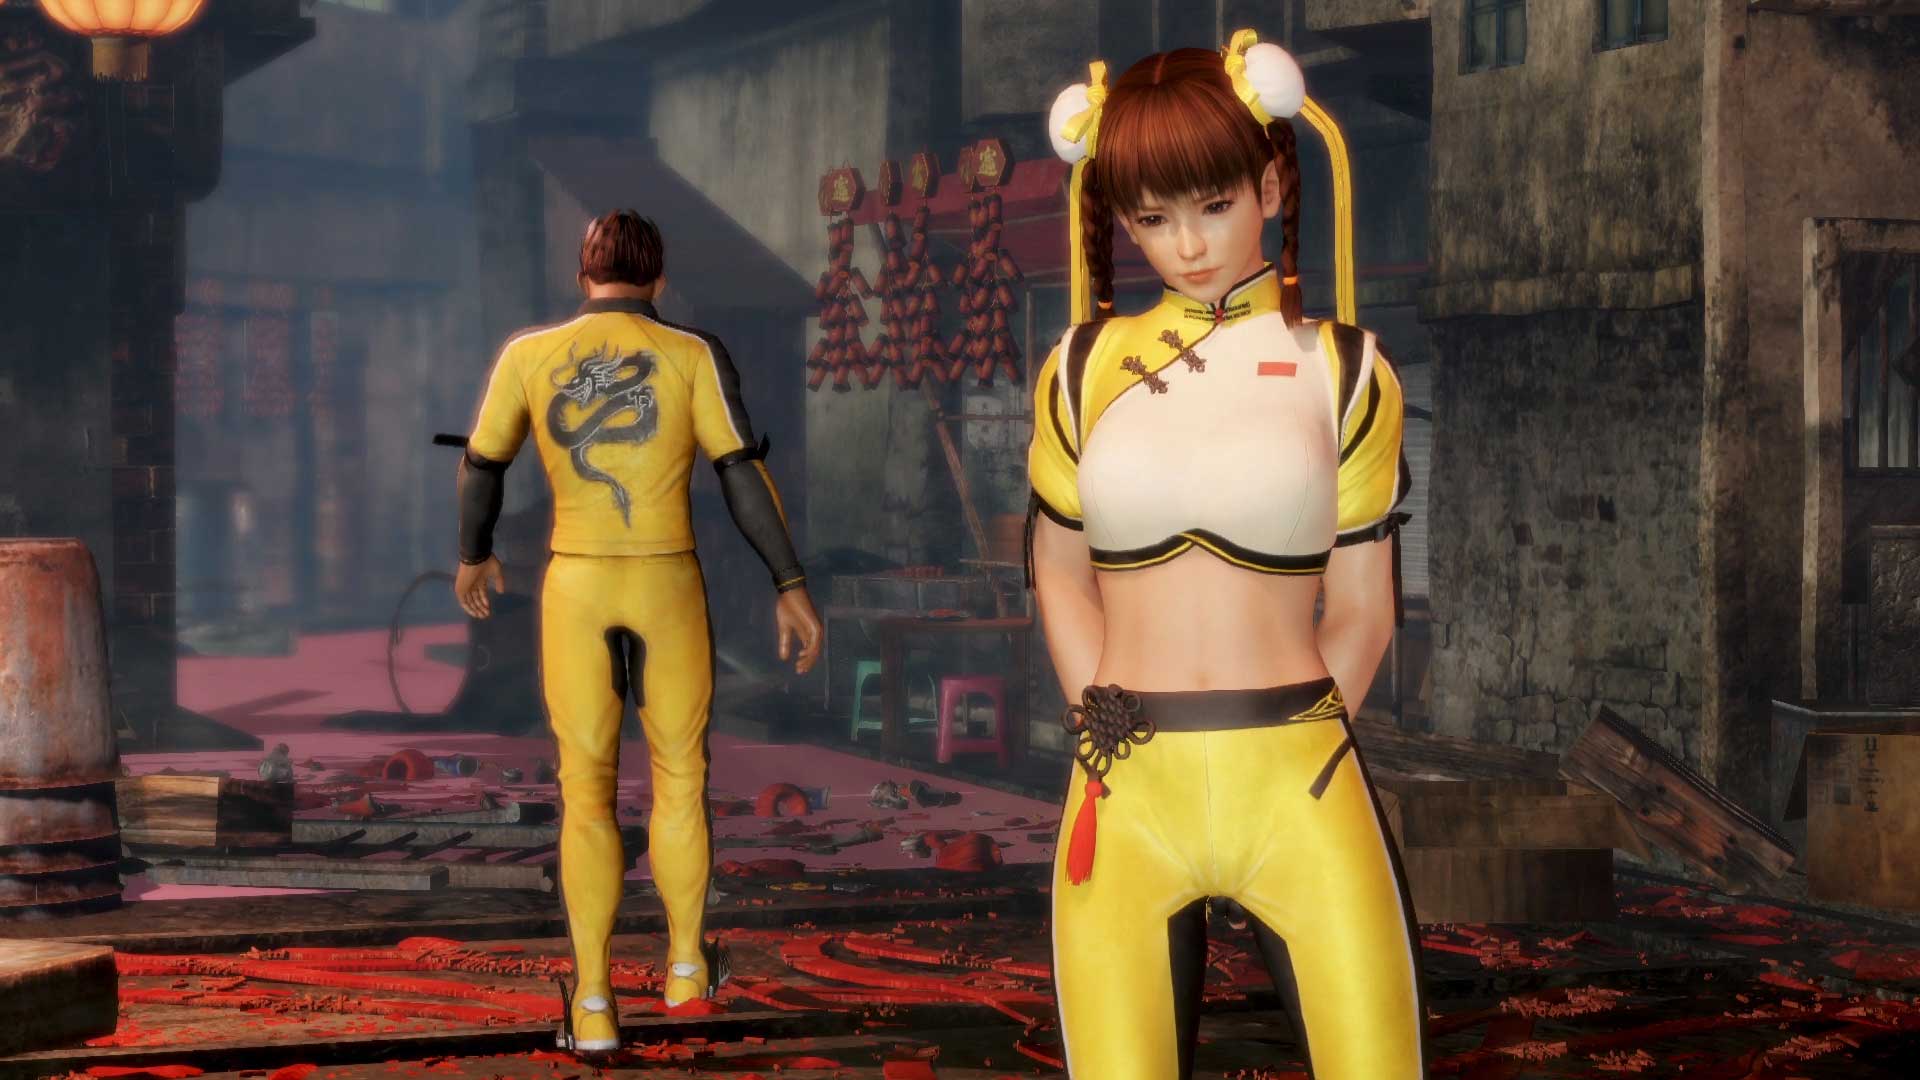 Dog or alive демо. Dead or Alive 6. Dead or Alive 6 Leifang. Dead or Alive 6 Касуми. Dead or Alive Diego.